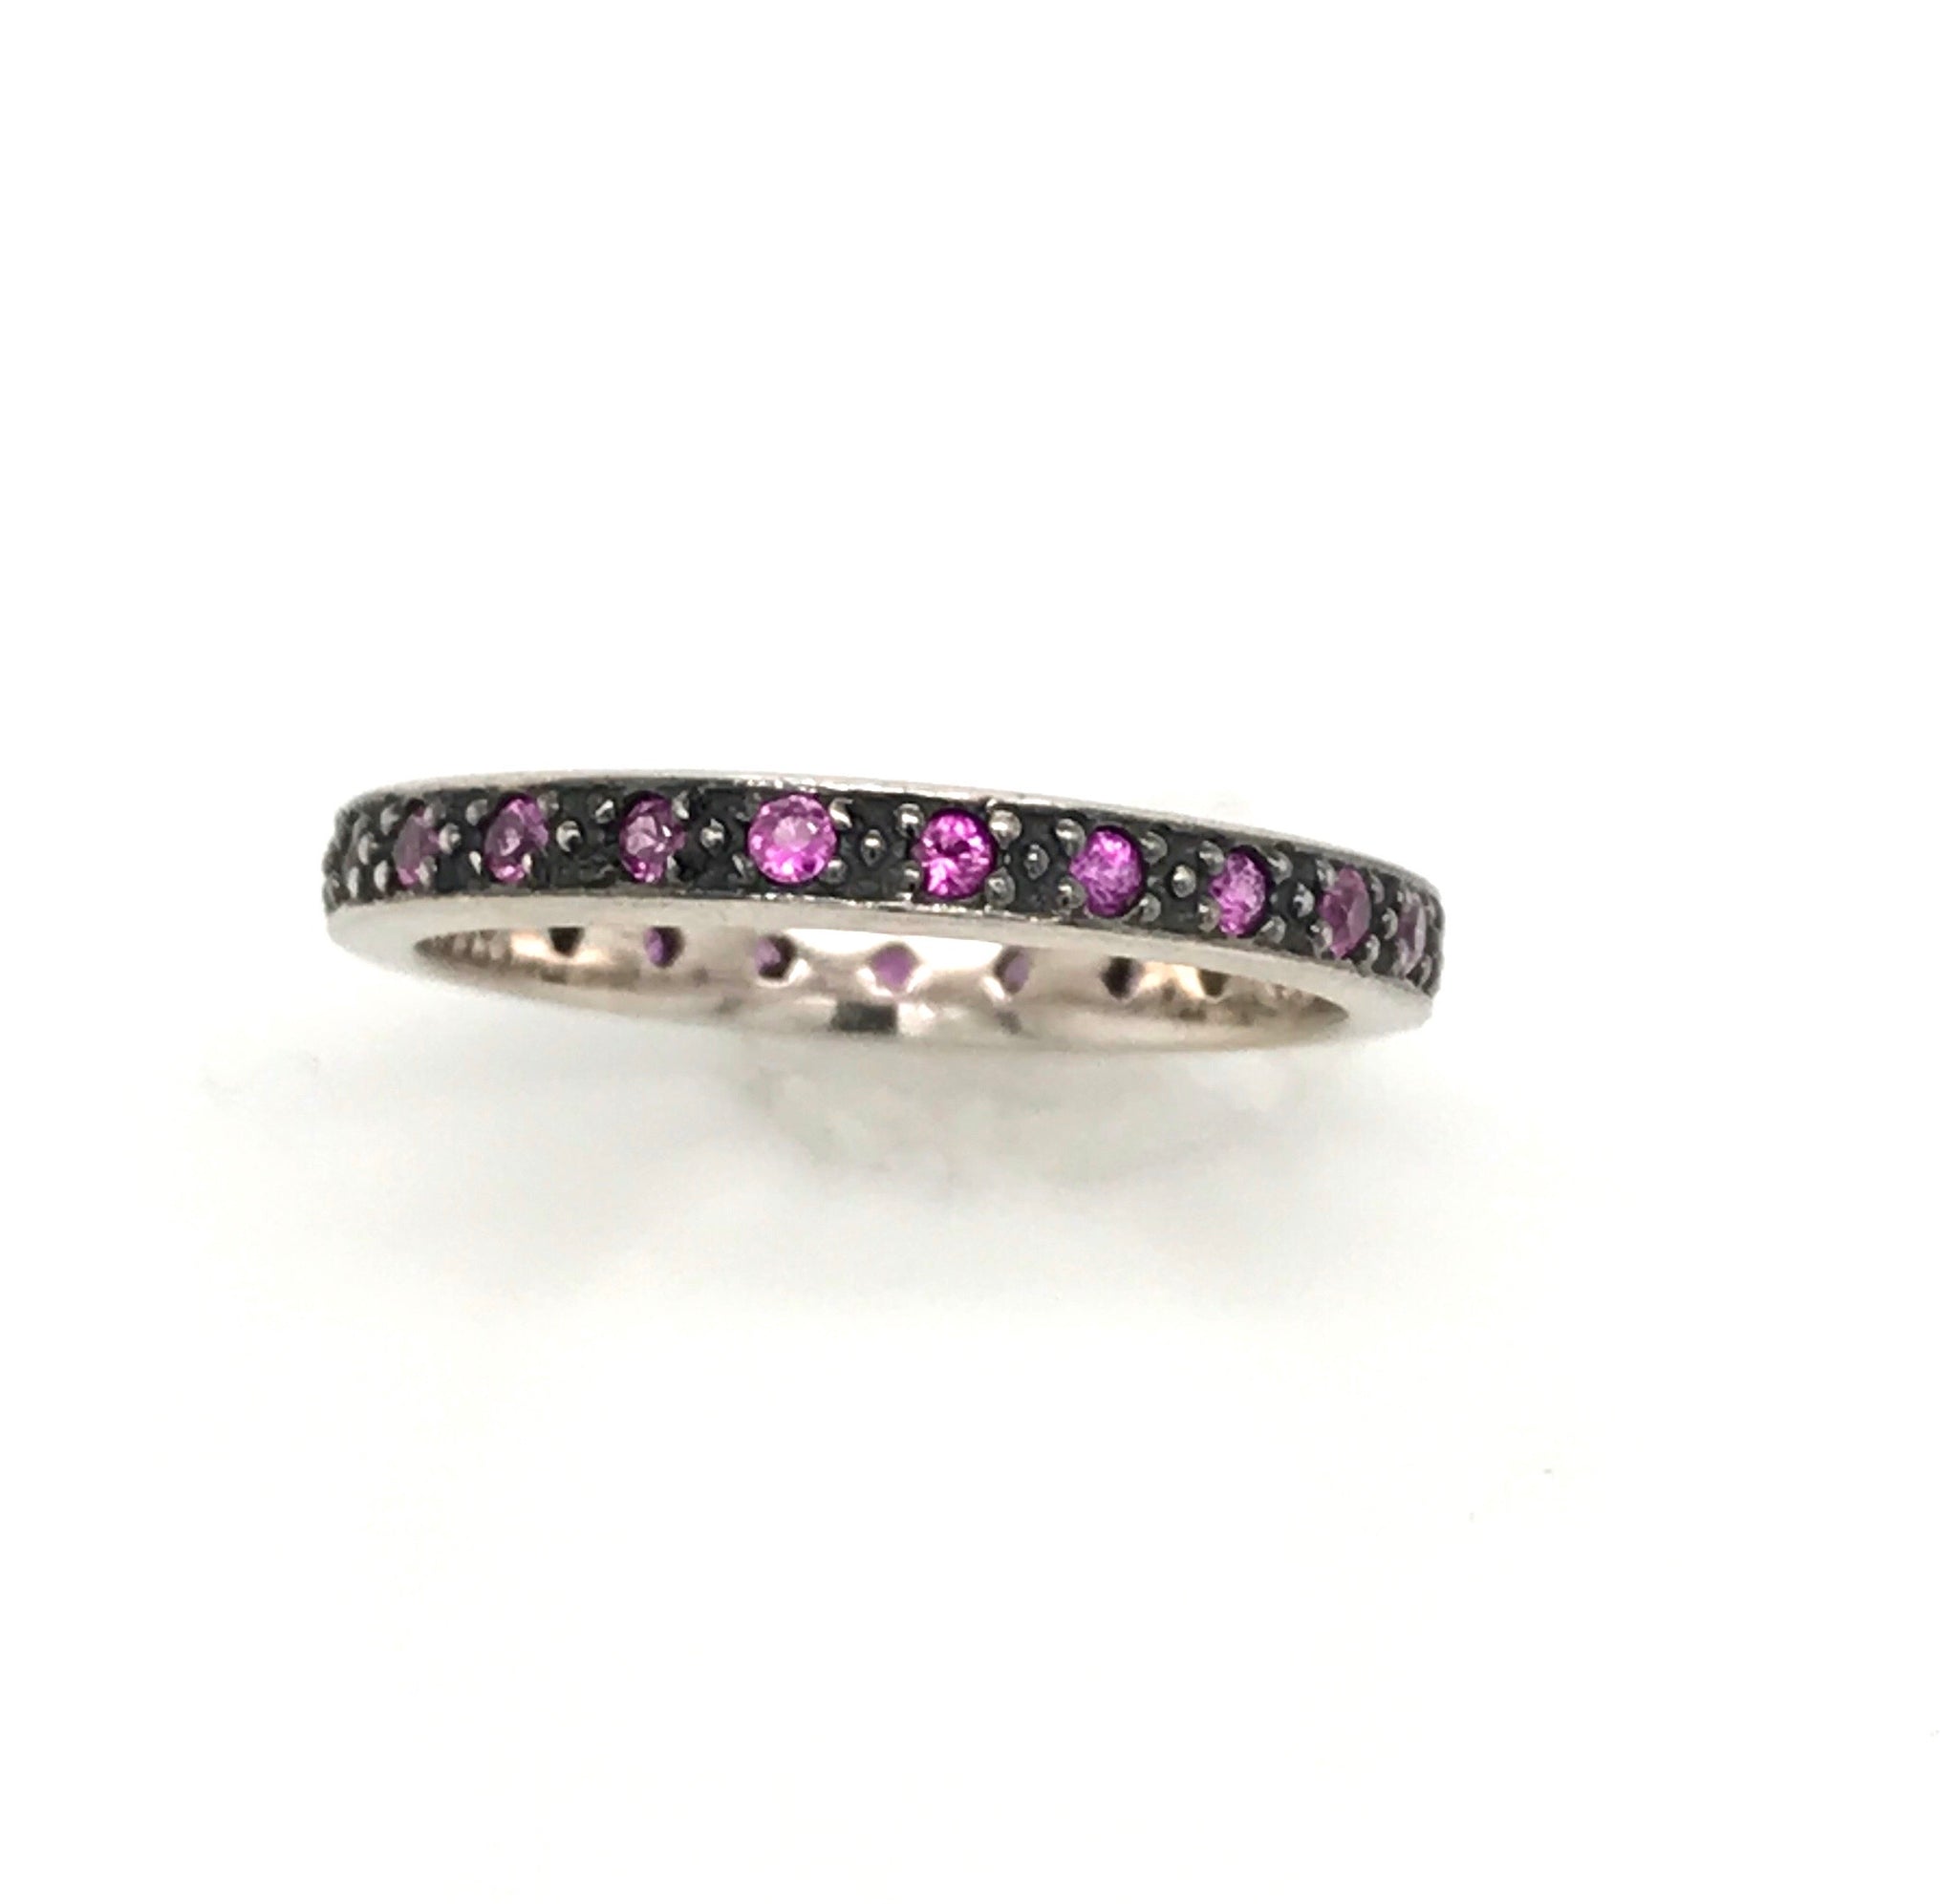 Pave' Pink Sapphire Eternity Band